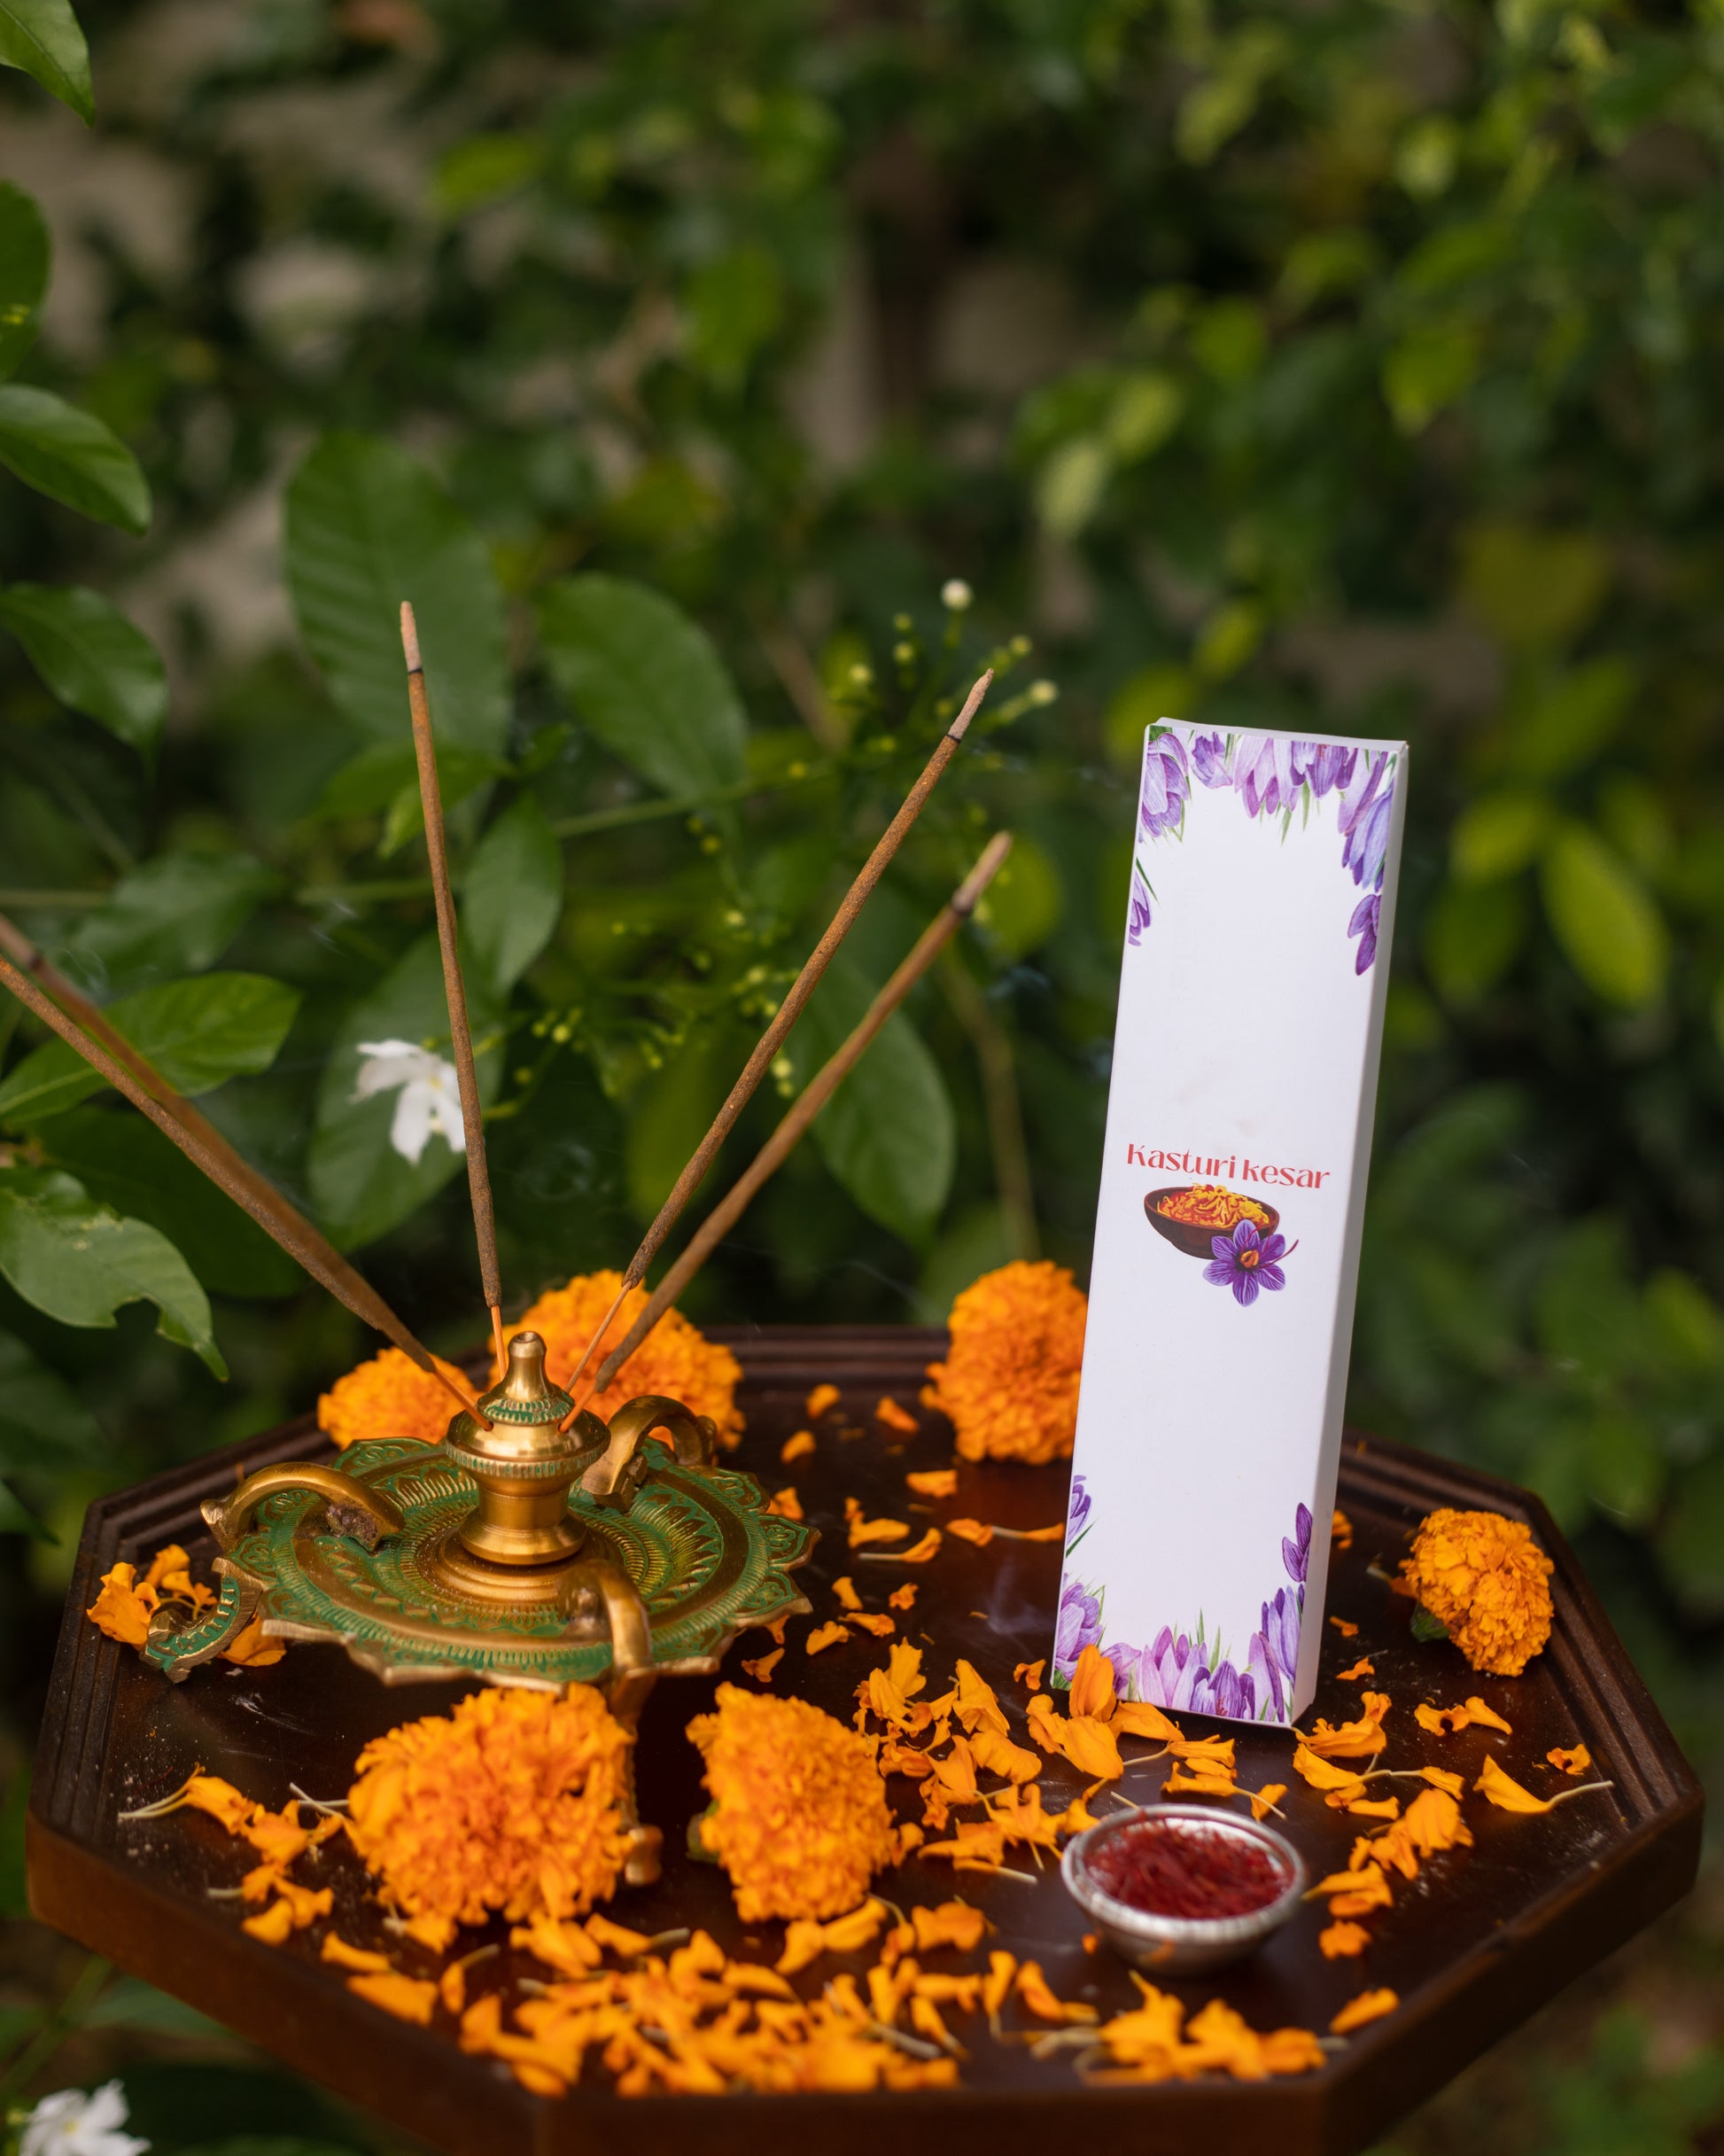 One of the most essentials ingredients in any pooja, Agarbatti / incense sticks are available in lavender, gulab, kesar kasturi, chandan, mogra